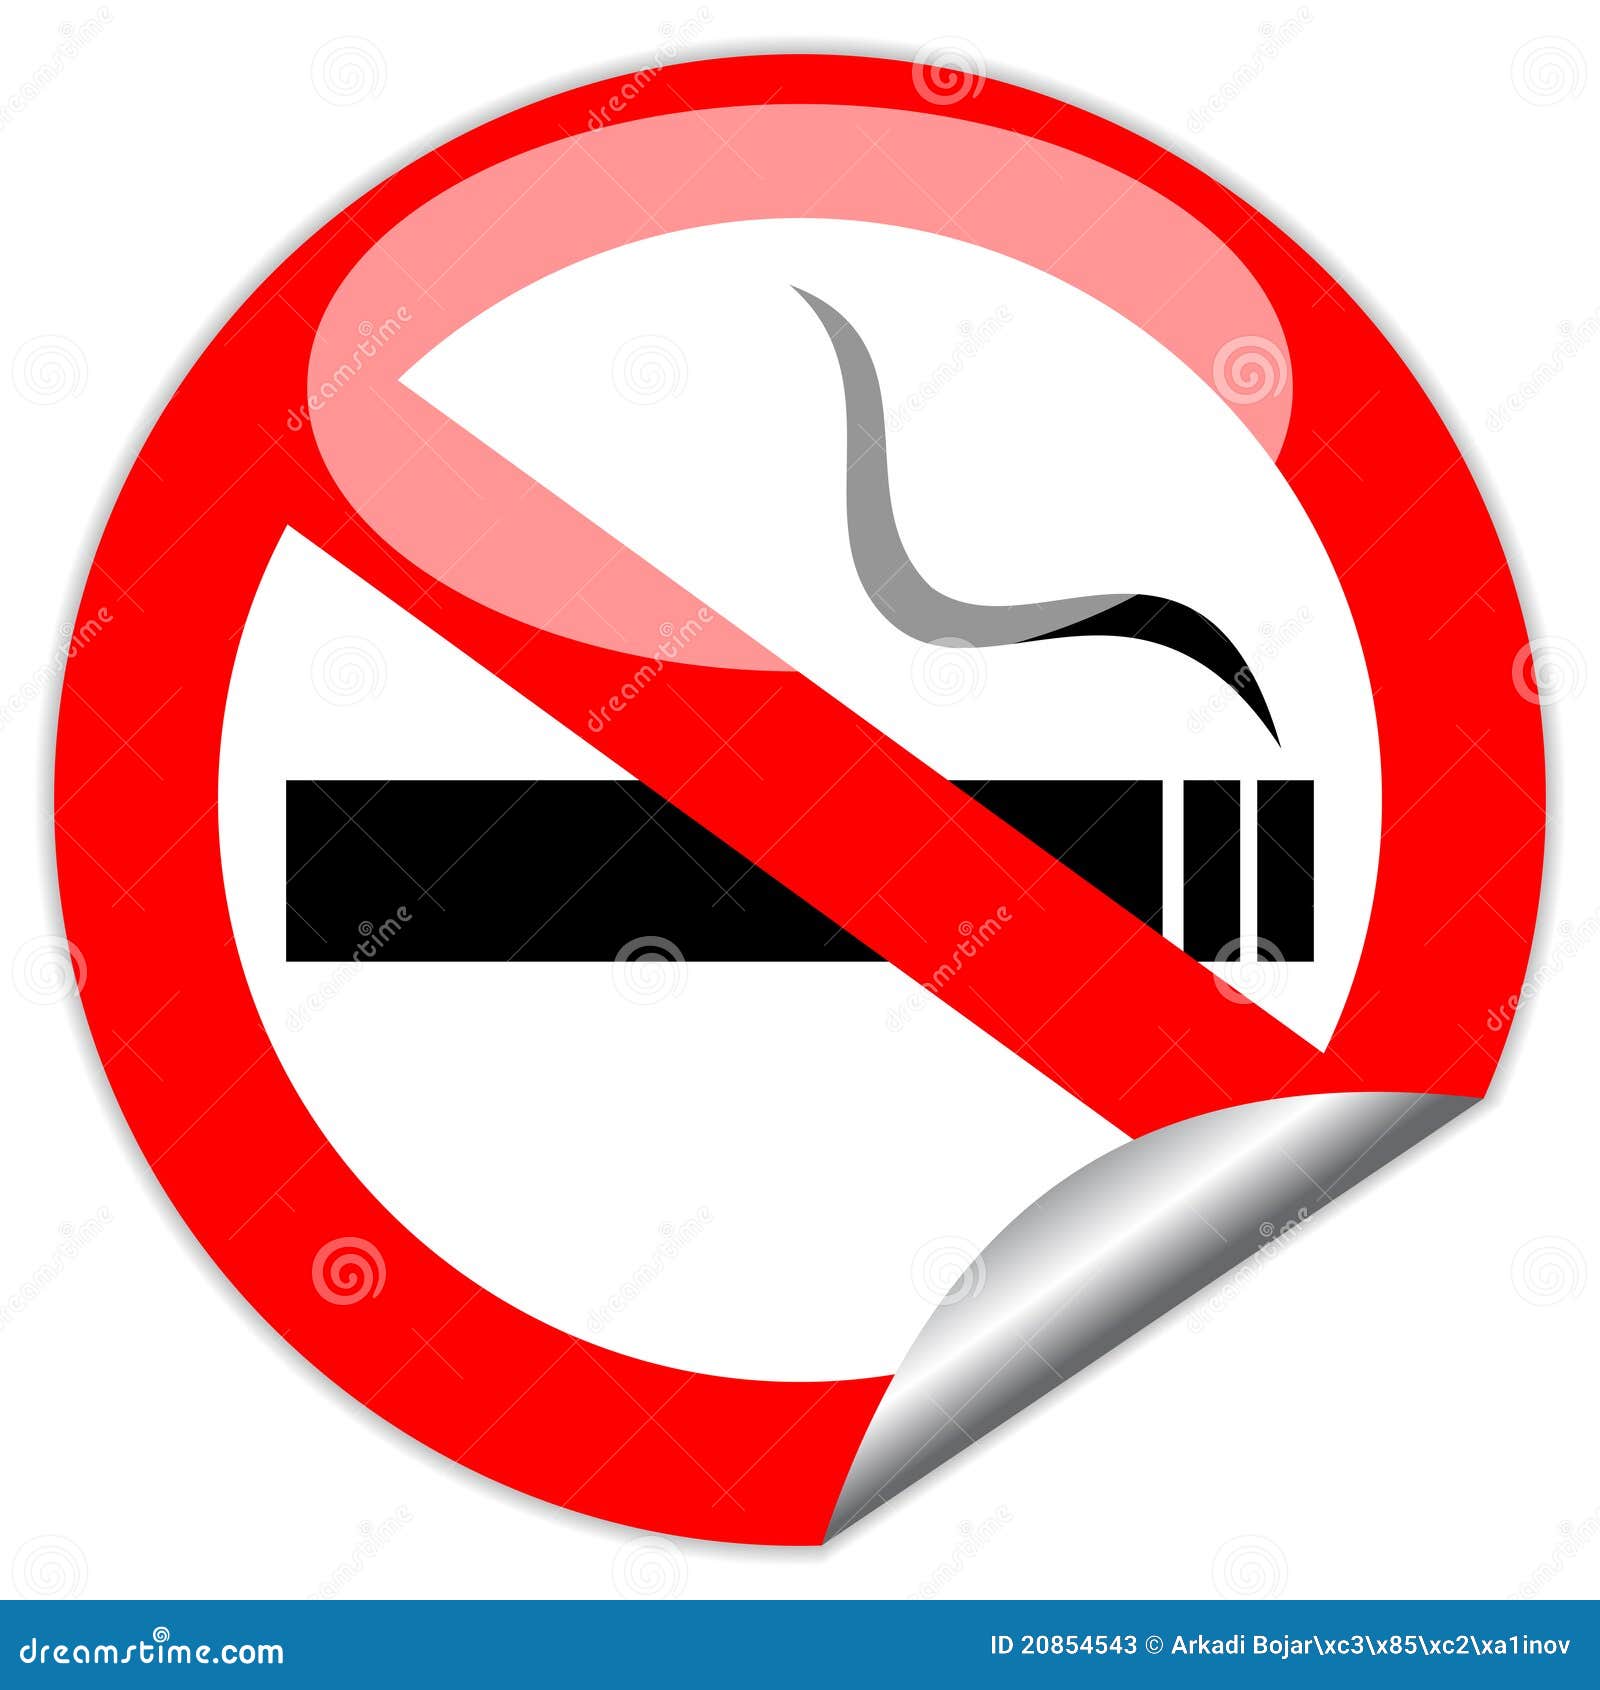 No smoking sign stock vector. Illustration of caution - 20854543